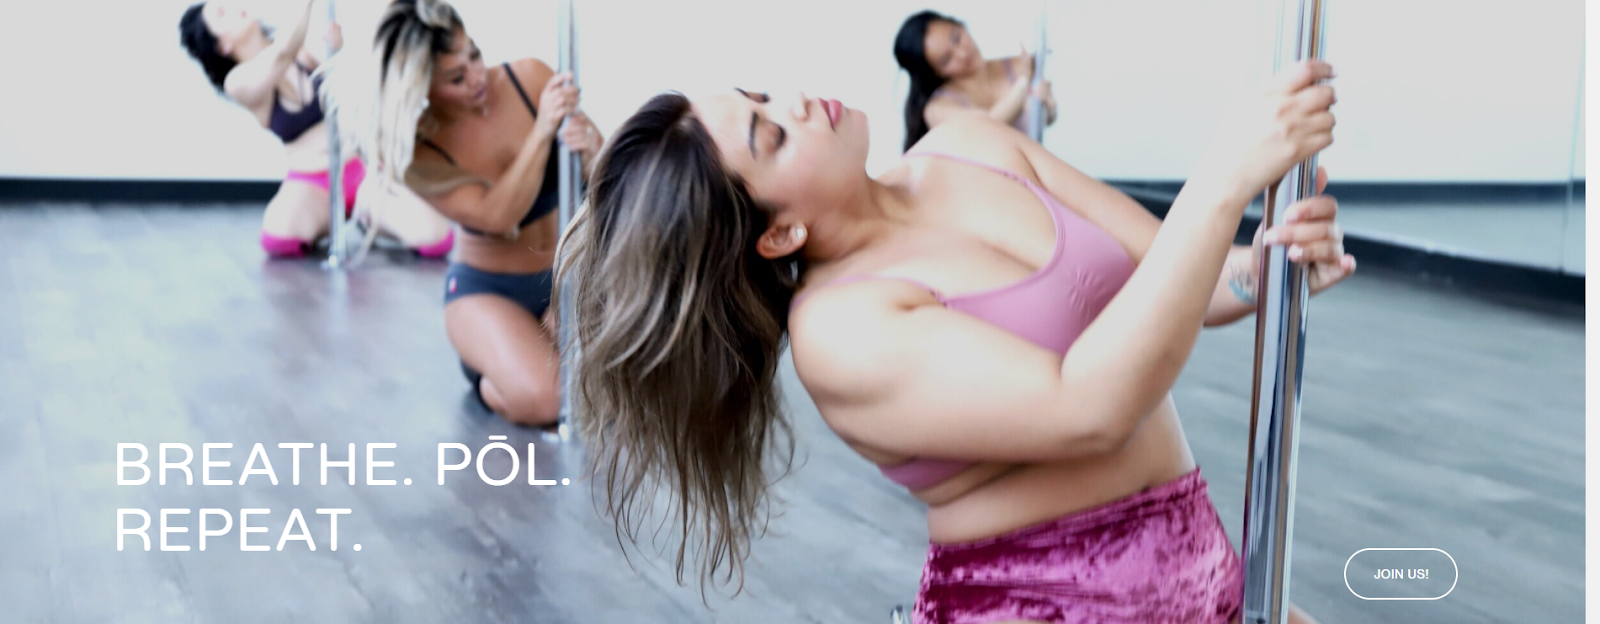 POL Is one of The 5 Best Pole Dance Classes In Long Beach